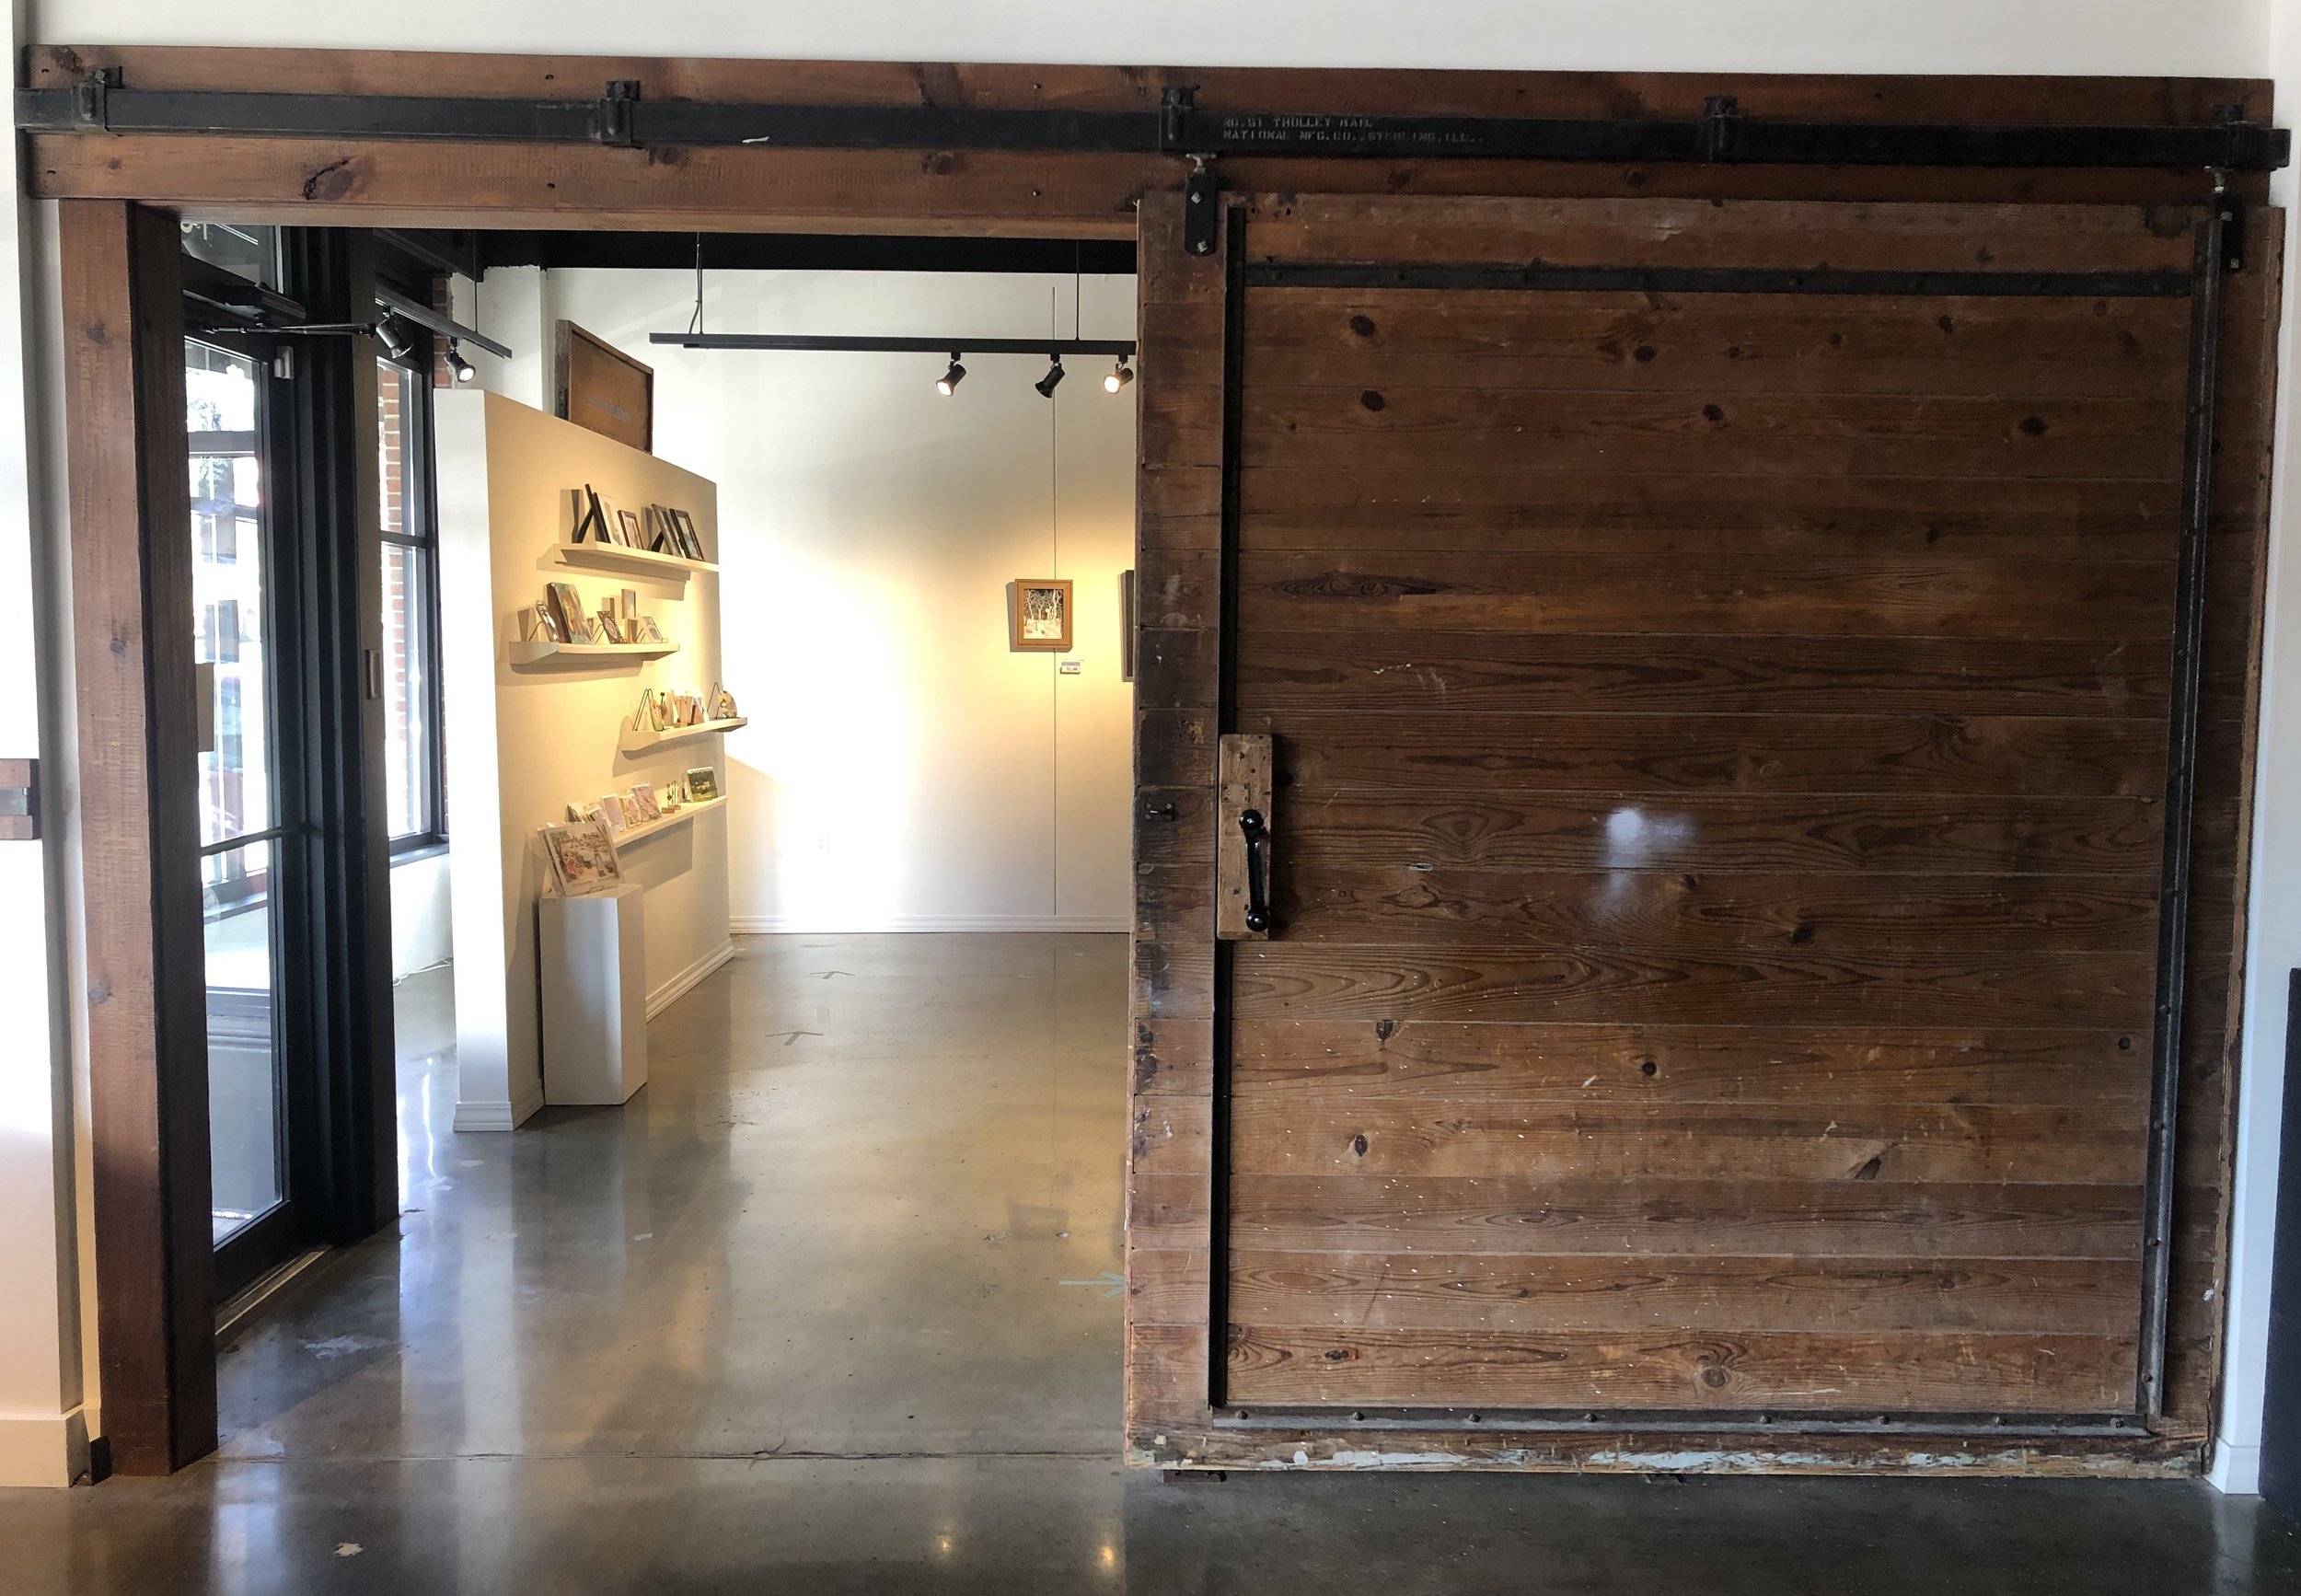 View of Visual Arts Cooperative Gallery from AC SEMO Gallery